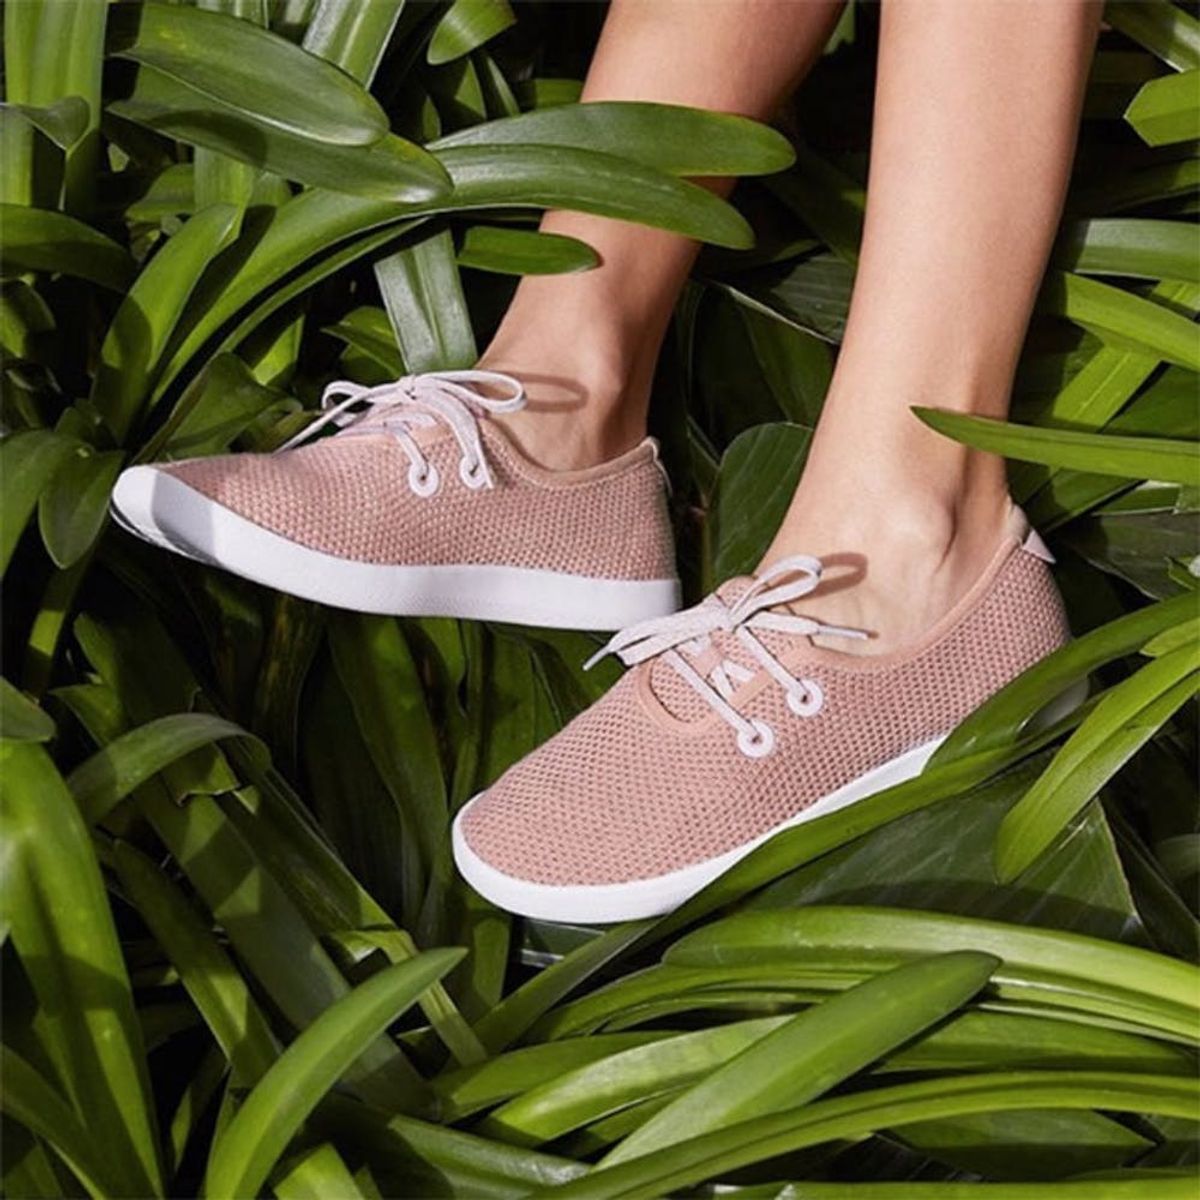 I Wore Shoes Made from Trees for a Week — Here’s What Happened